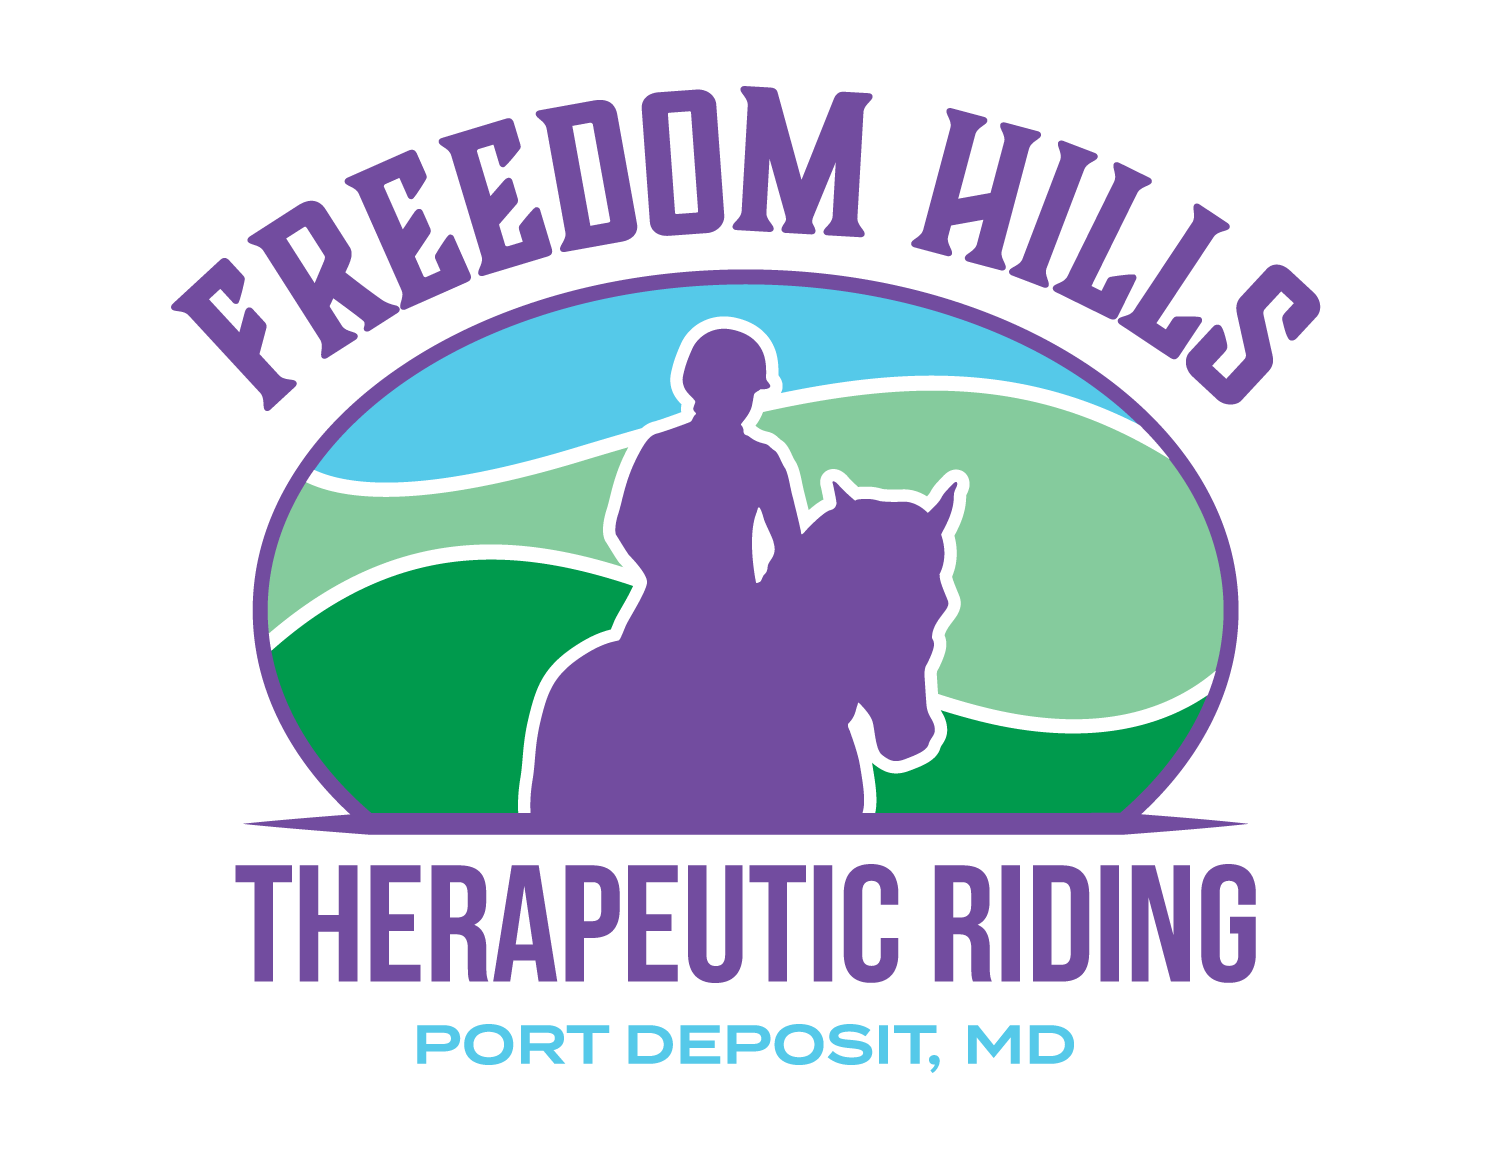 Freedom Hills Therapeutic Riding 